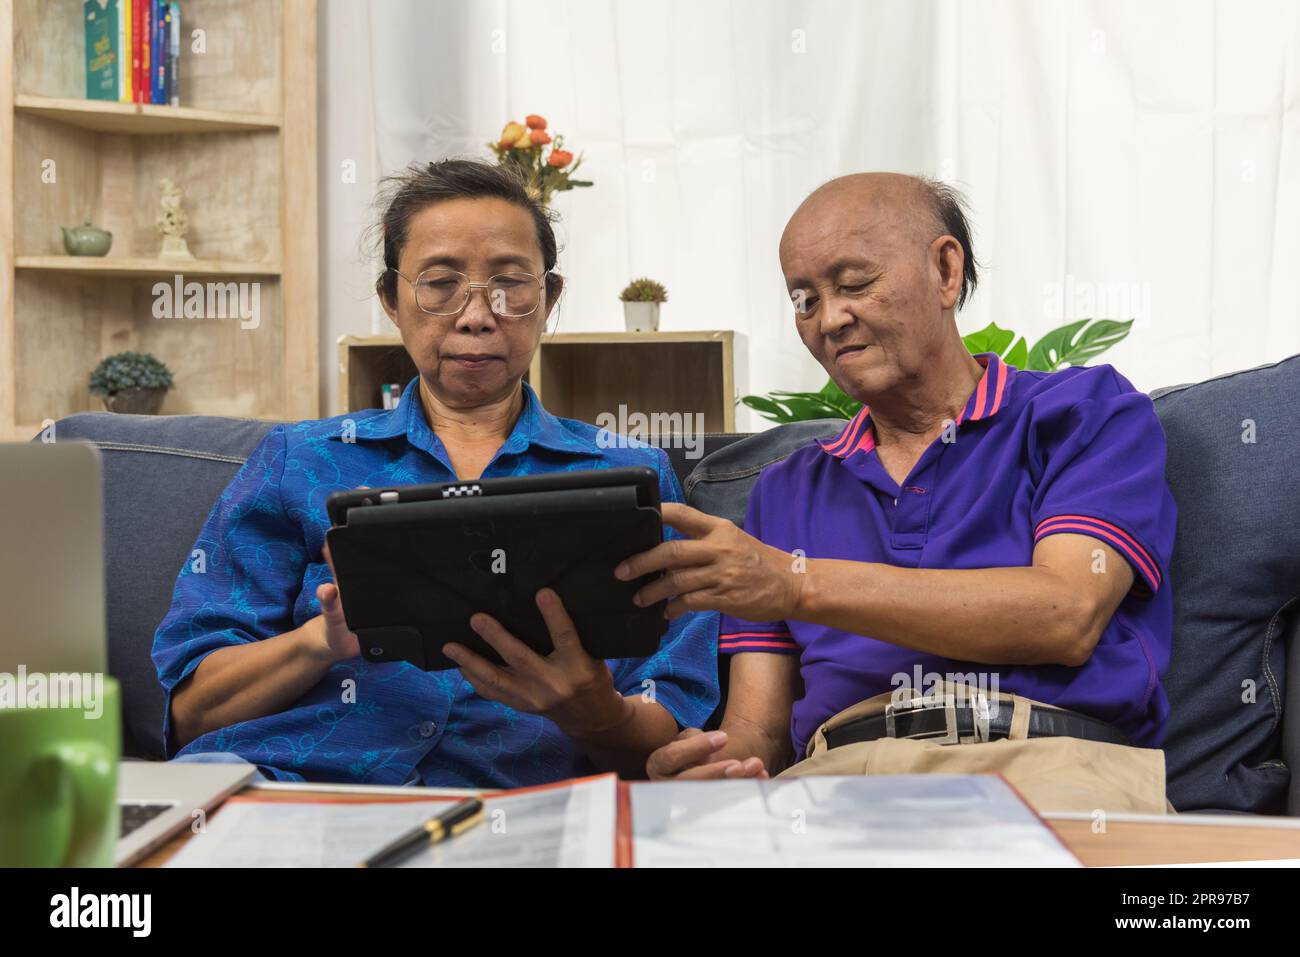 Elderly Asians use tablets and insurance documents at home. Stock Photo